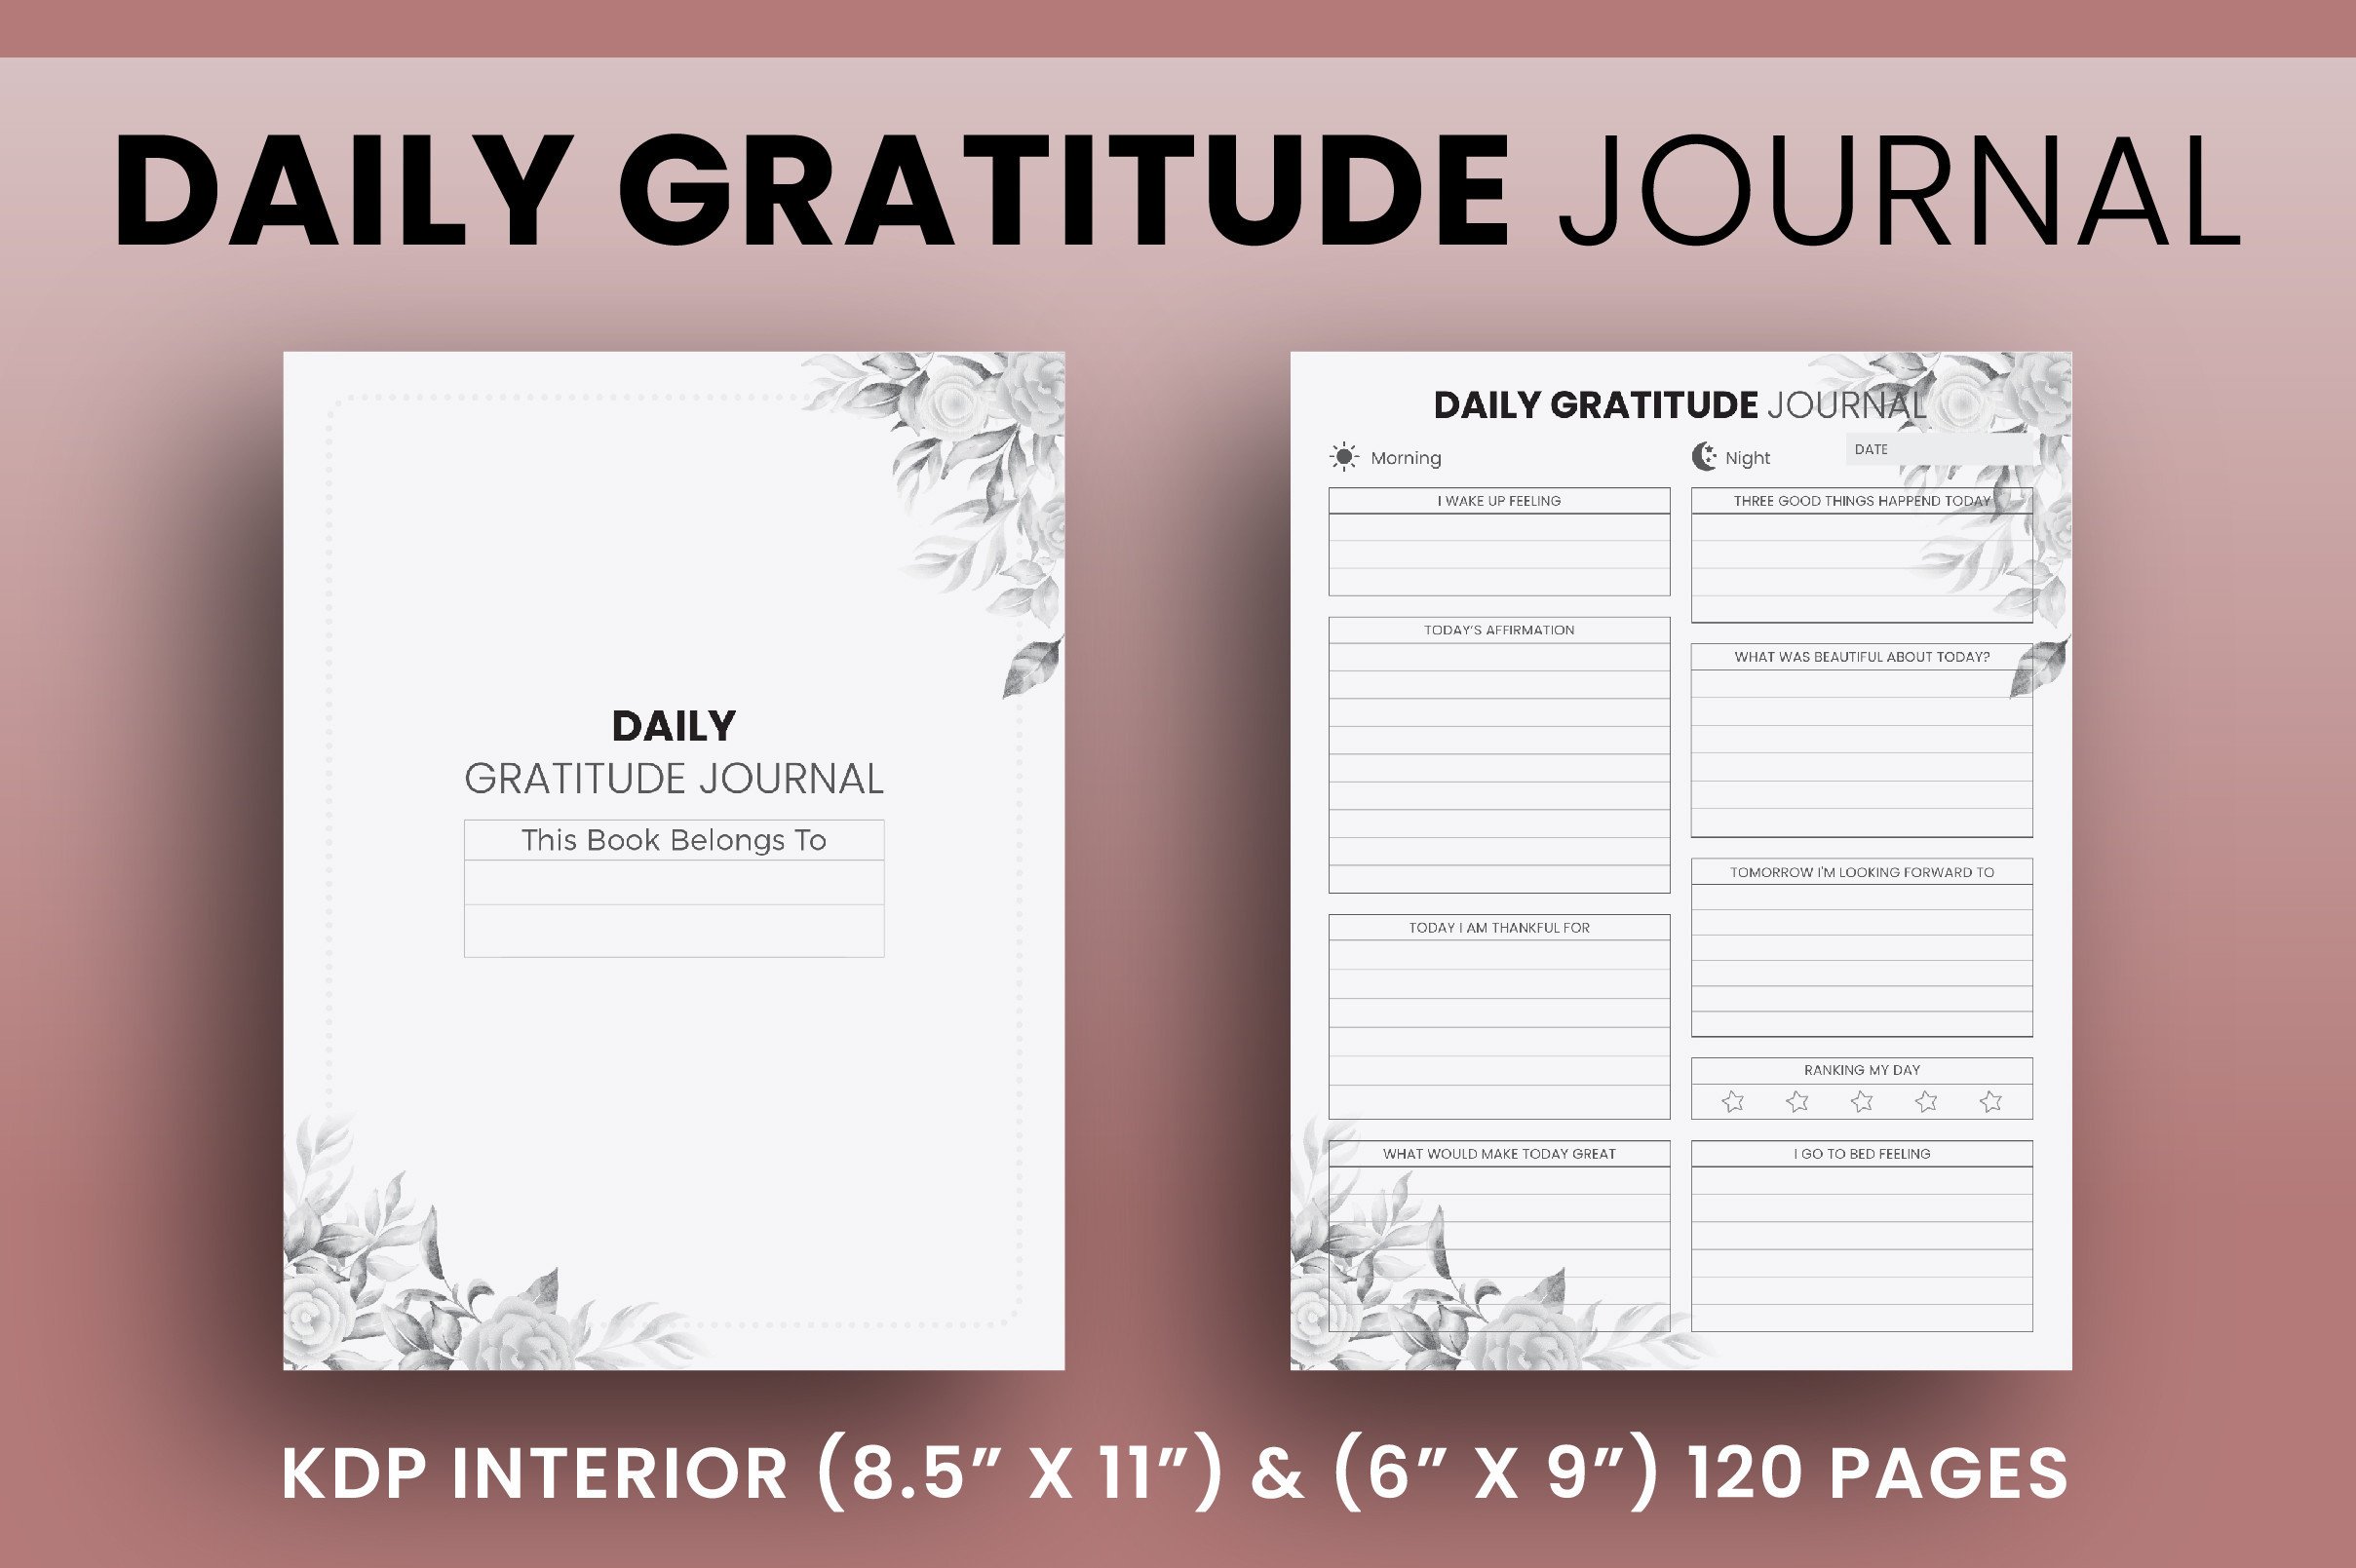 Daily Gratitude Journal - KDP Interior Graphic by Vector Cafe